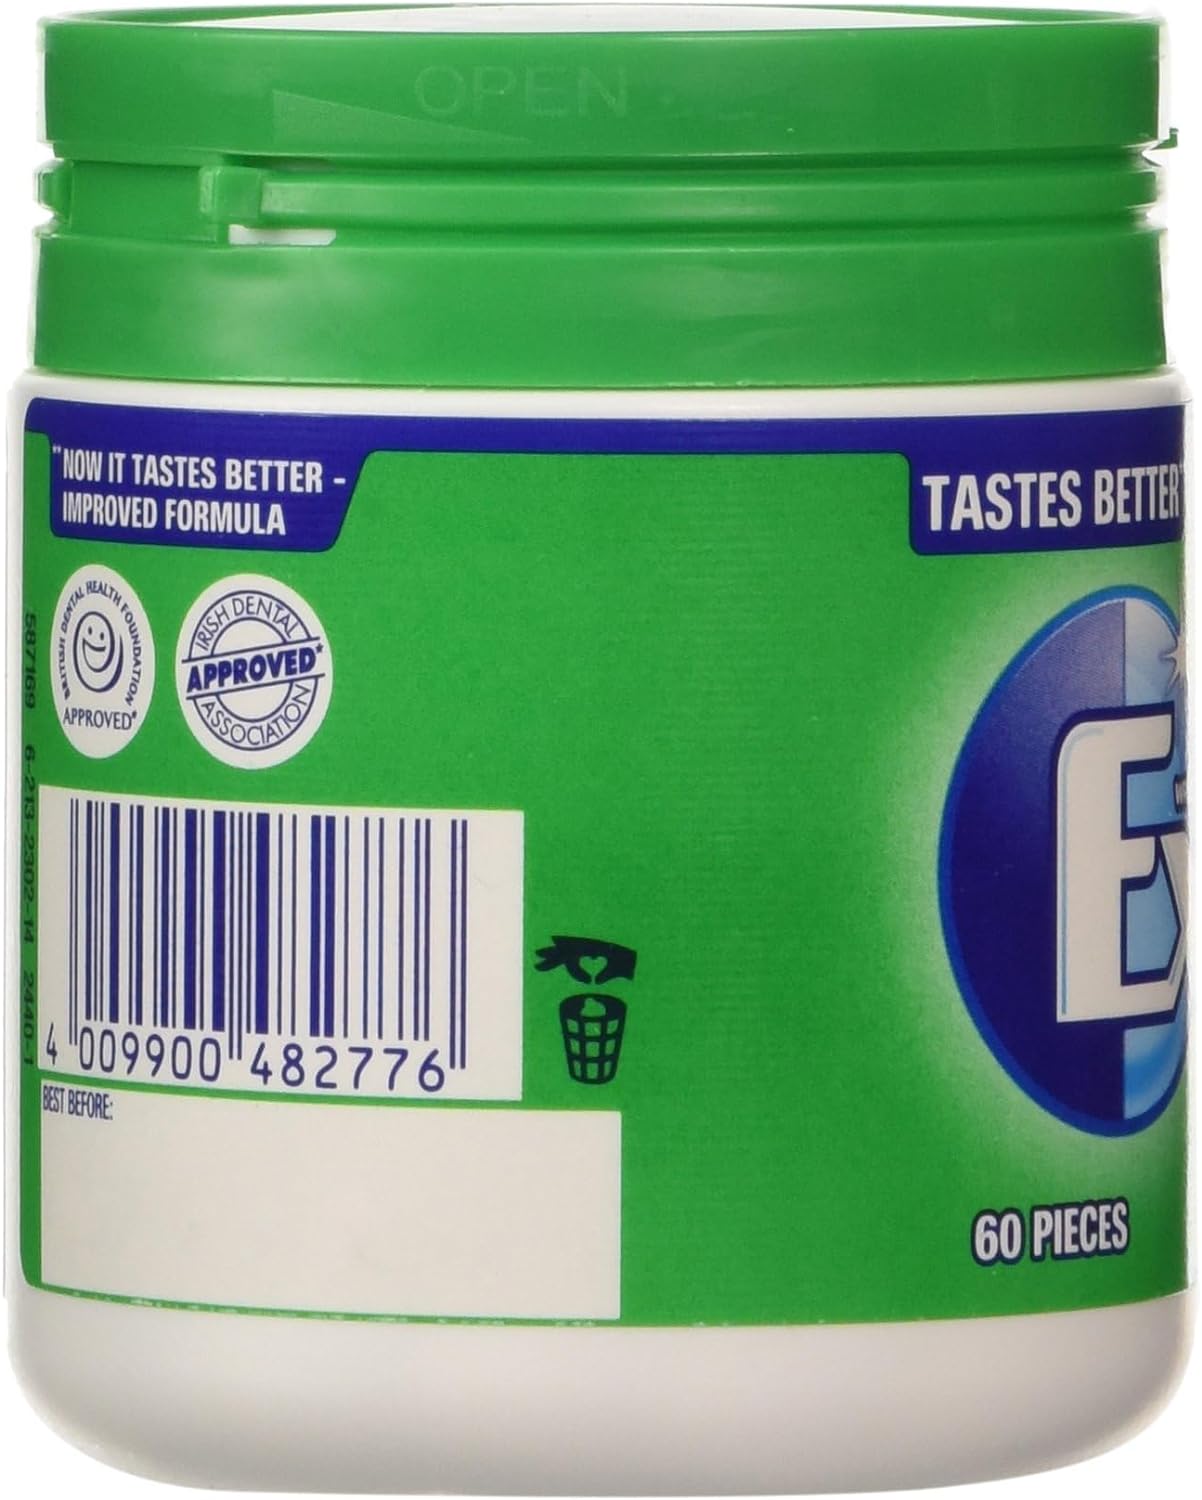 Extra White Chewing Gum Bottle, Sugar Free, Spearmint Flavour, 1 Bottle of 60 Pieces